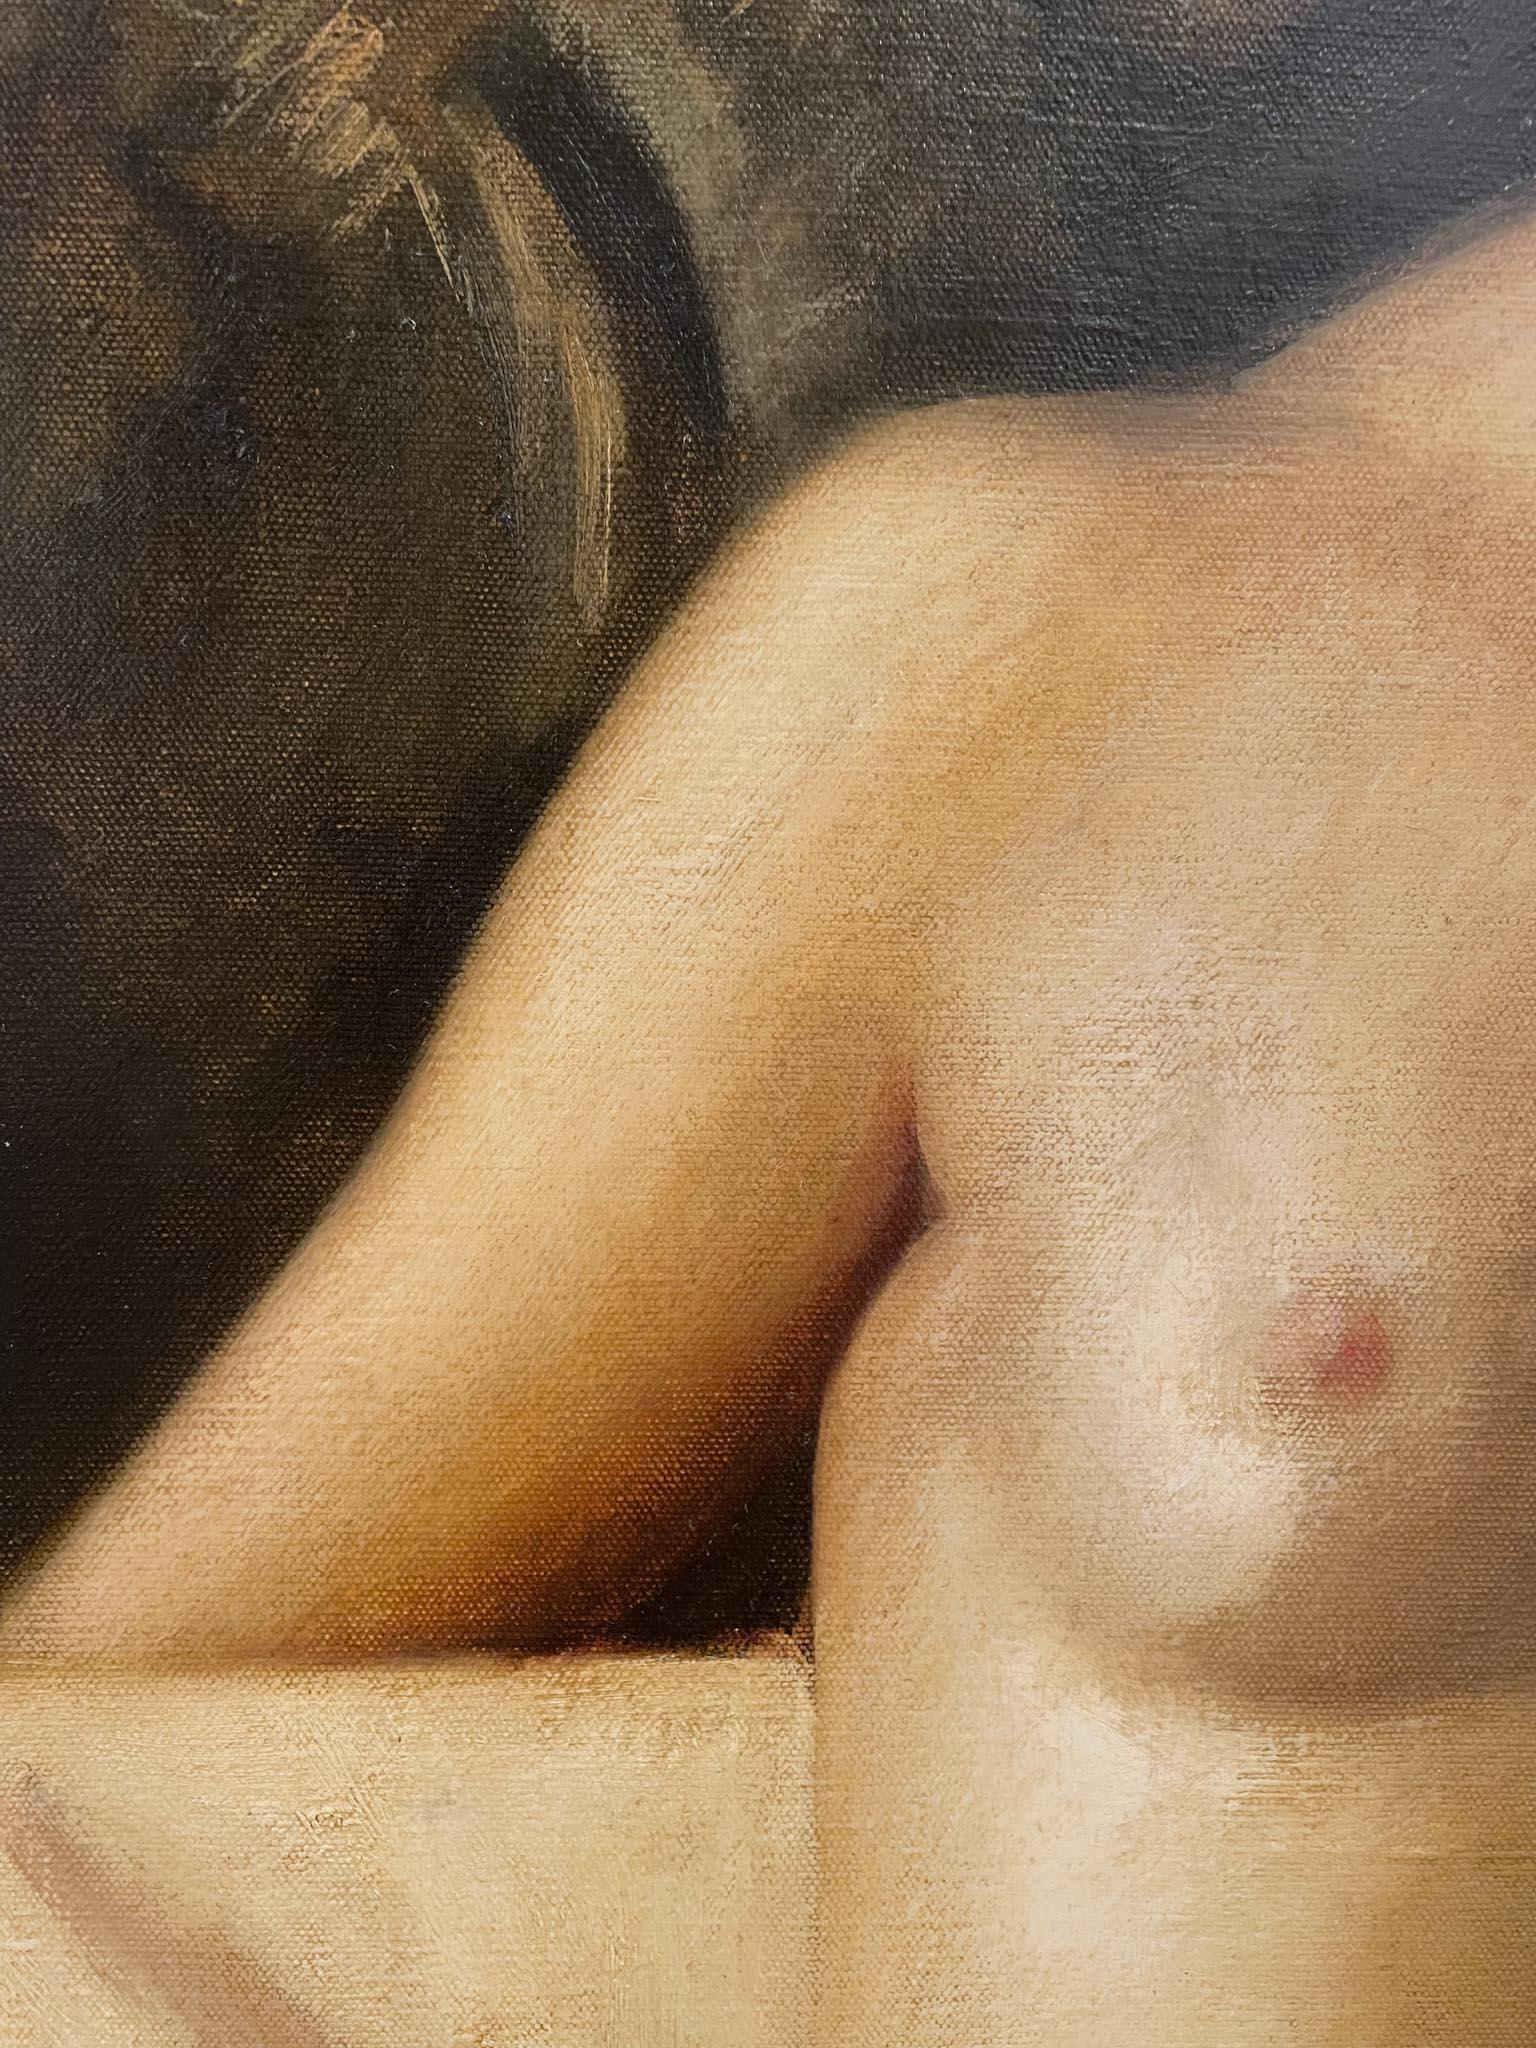 Nude Contemplative Woman - Other Art Style Painting by Julius Fehling